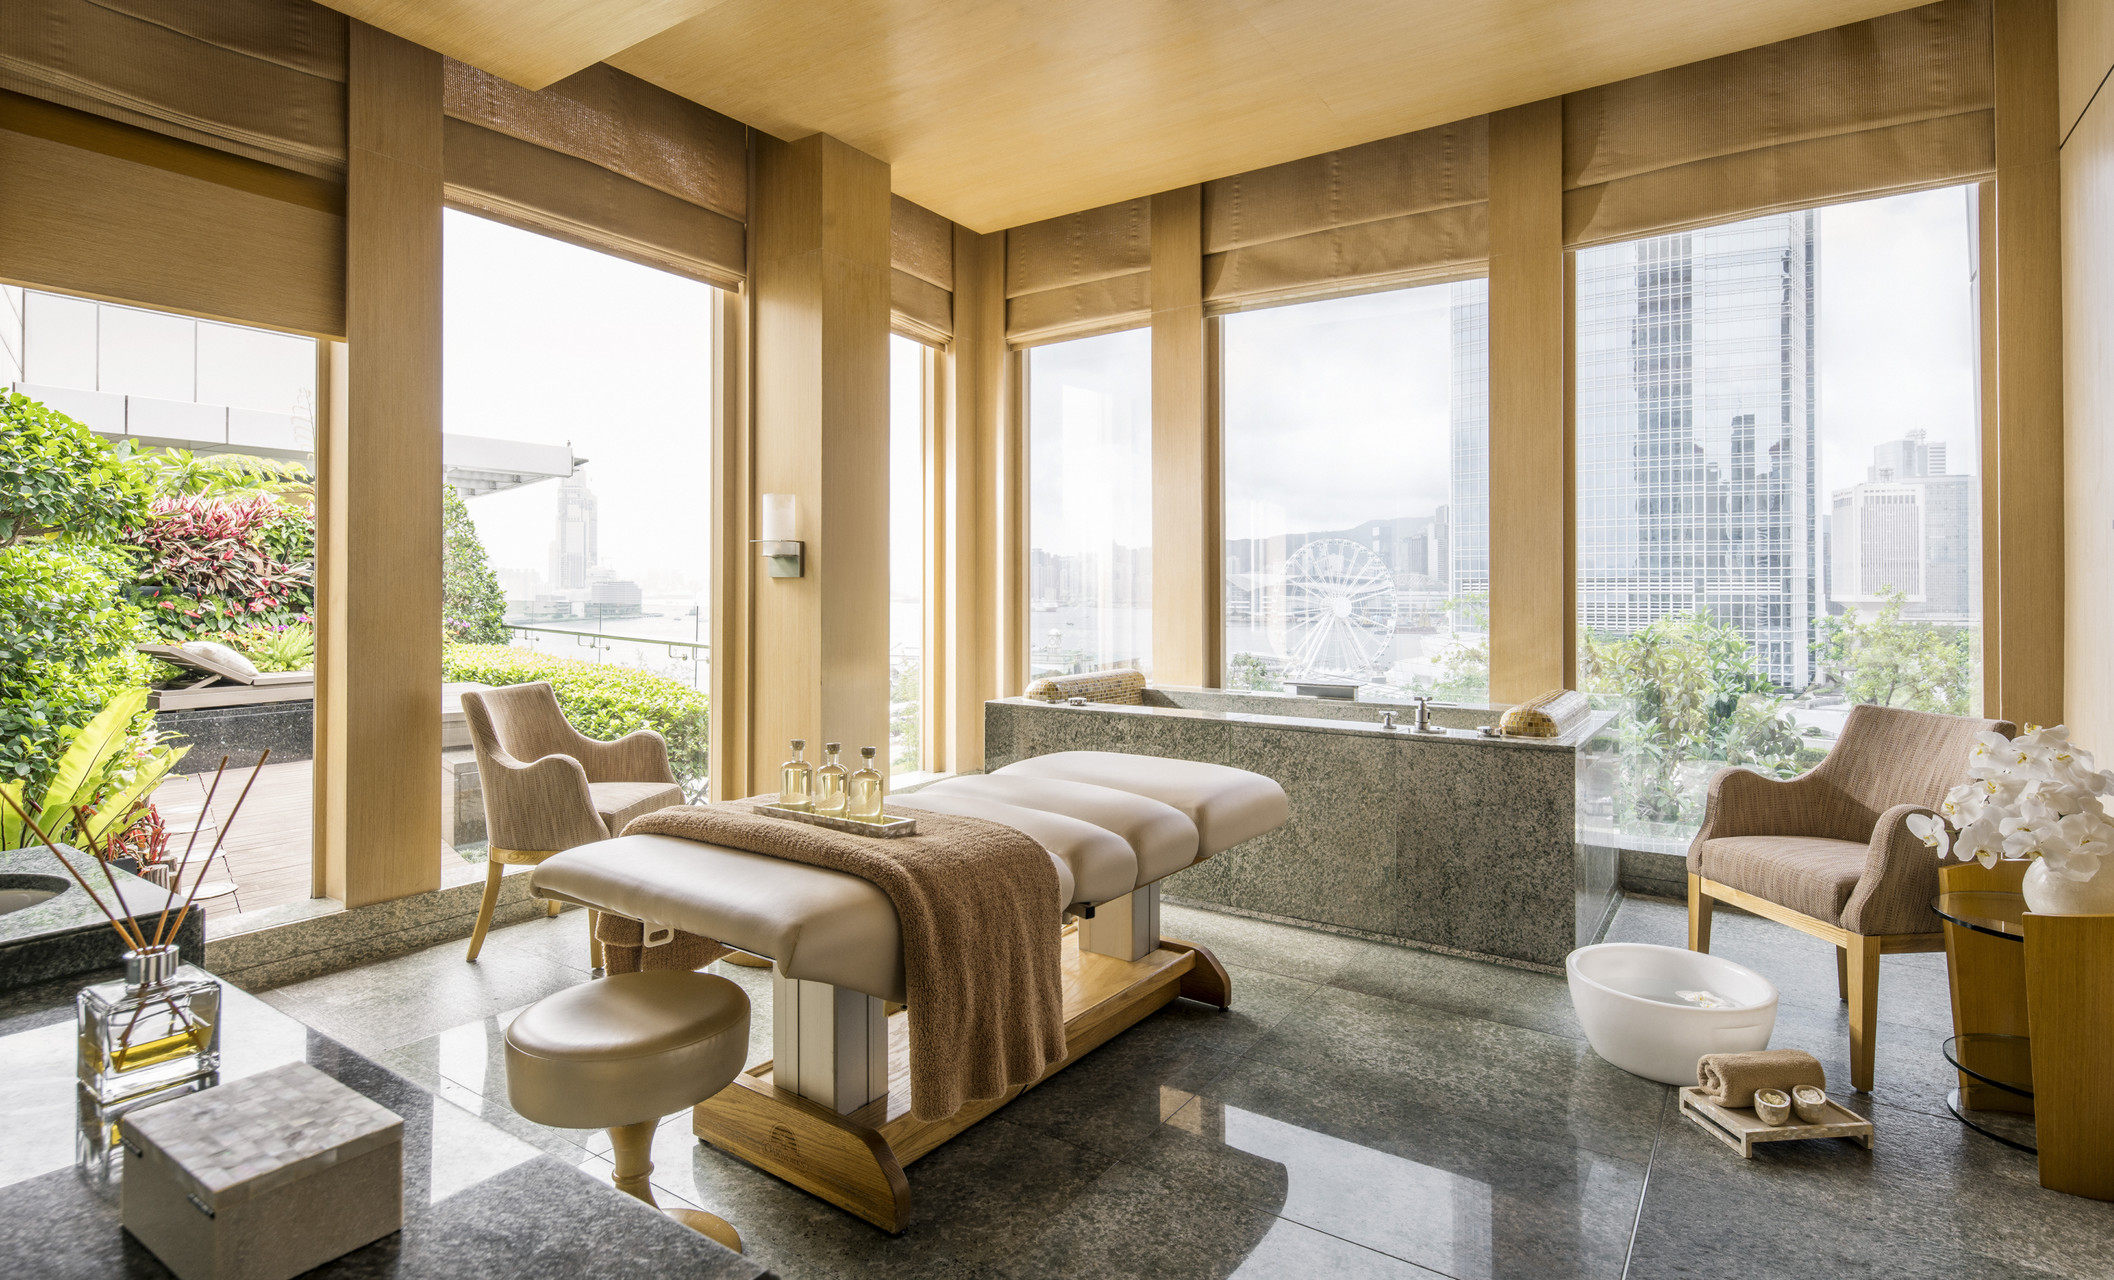 The spa suite at Four Seasons Hong Kong offers majestic views while you’re getting a massage. Photo: Four Seasons Hong Kong